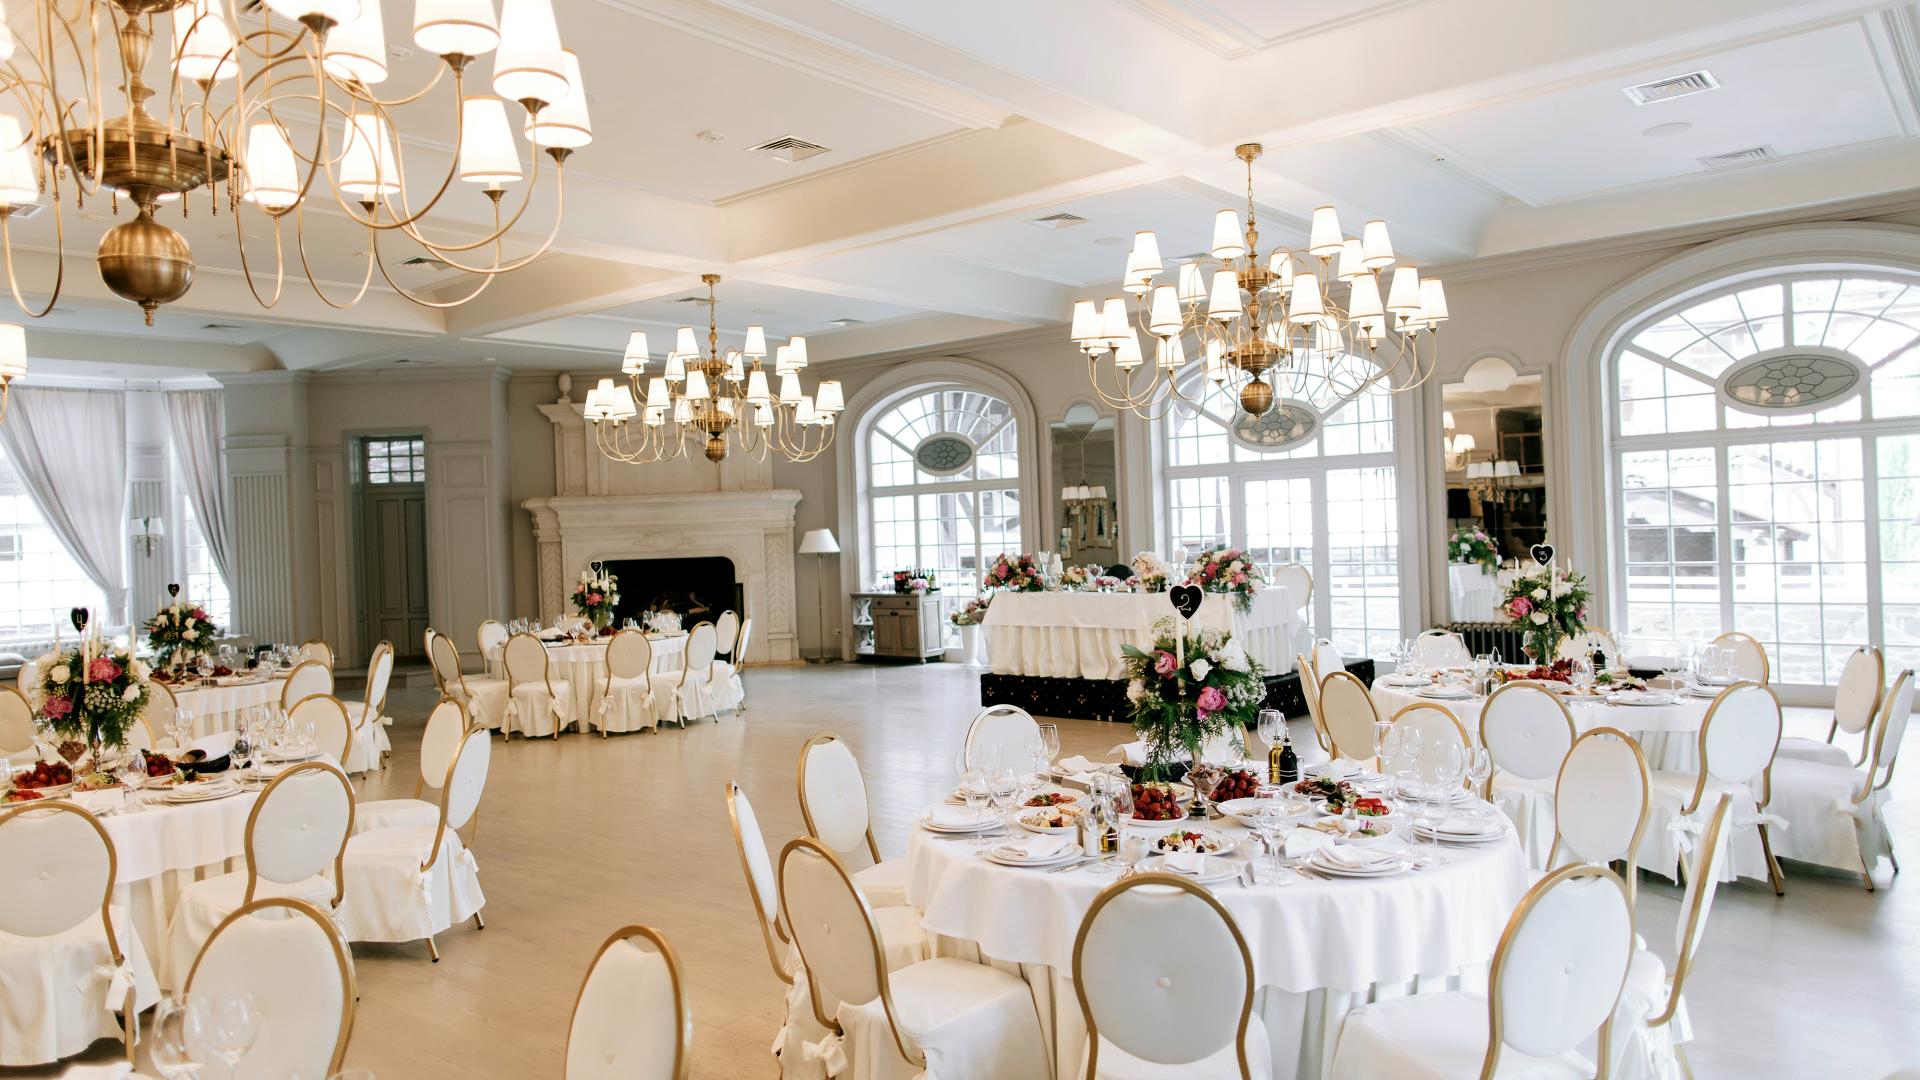 Luxury Wedding Venues for Rent in Chicago, IL